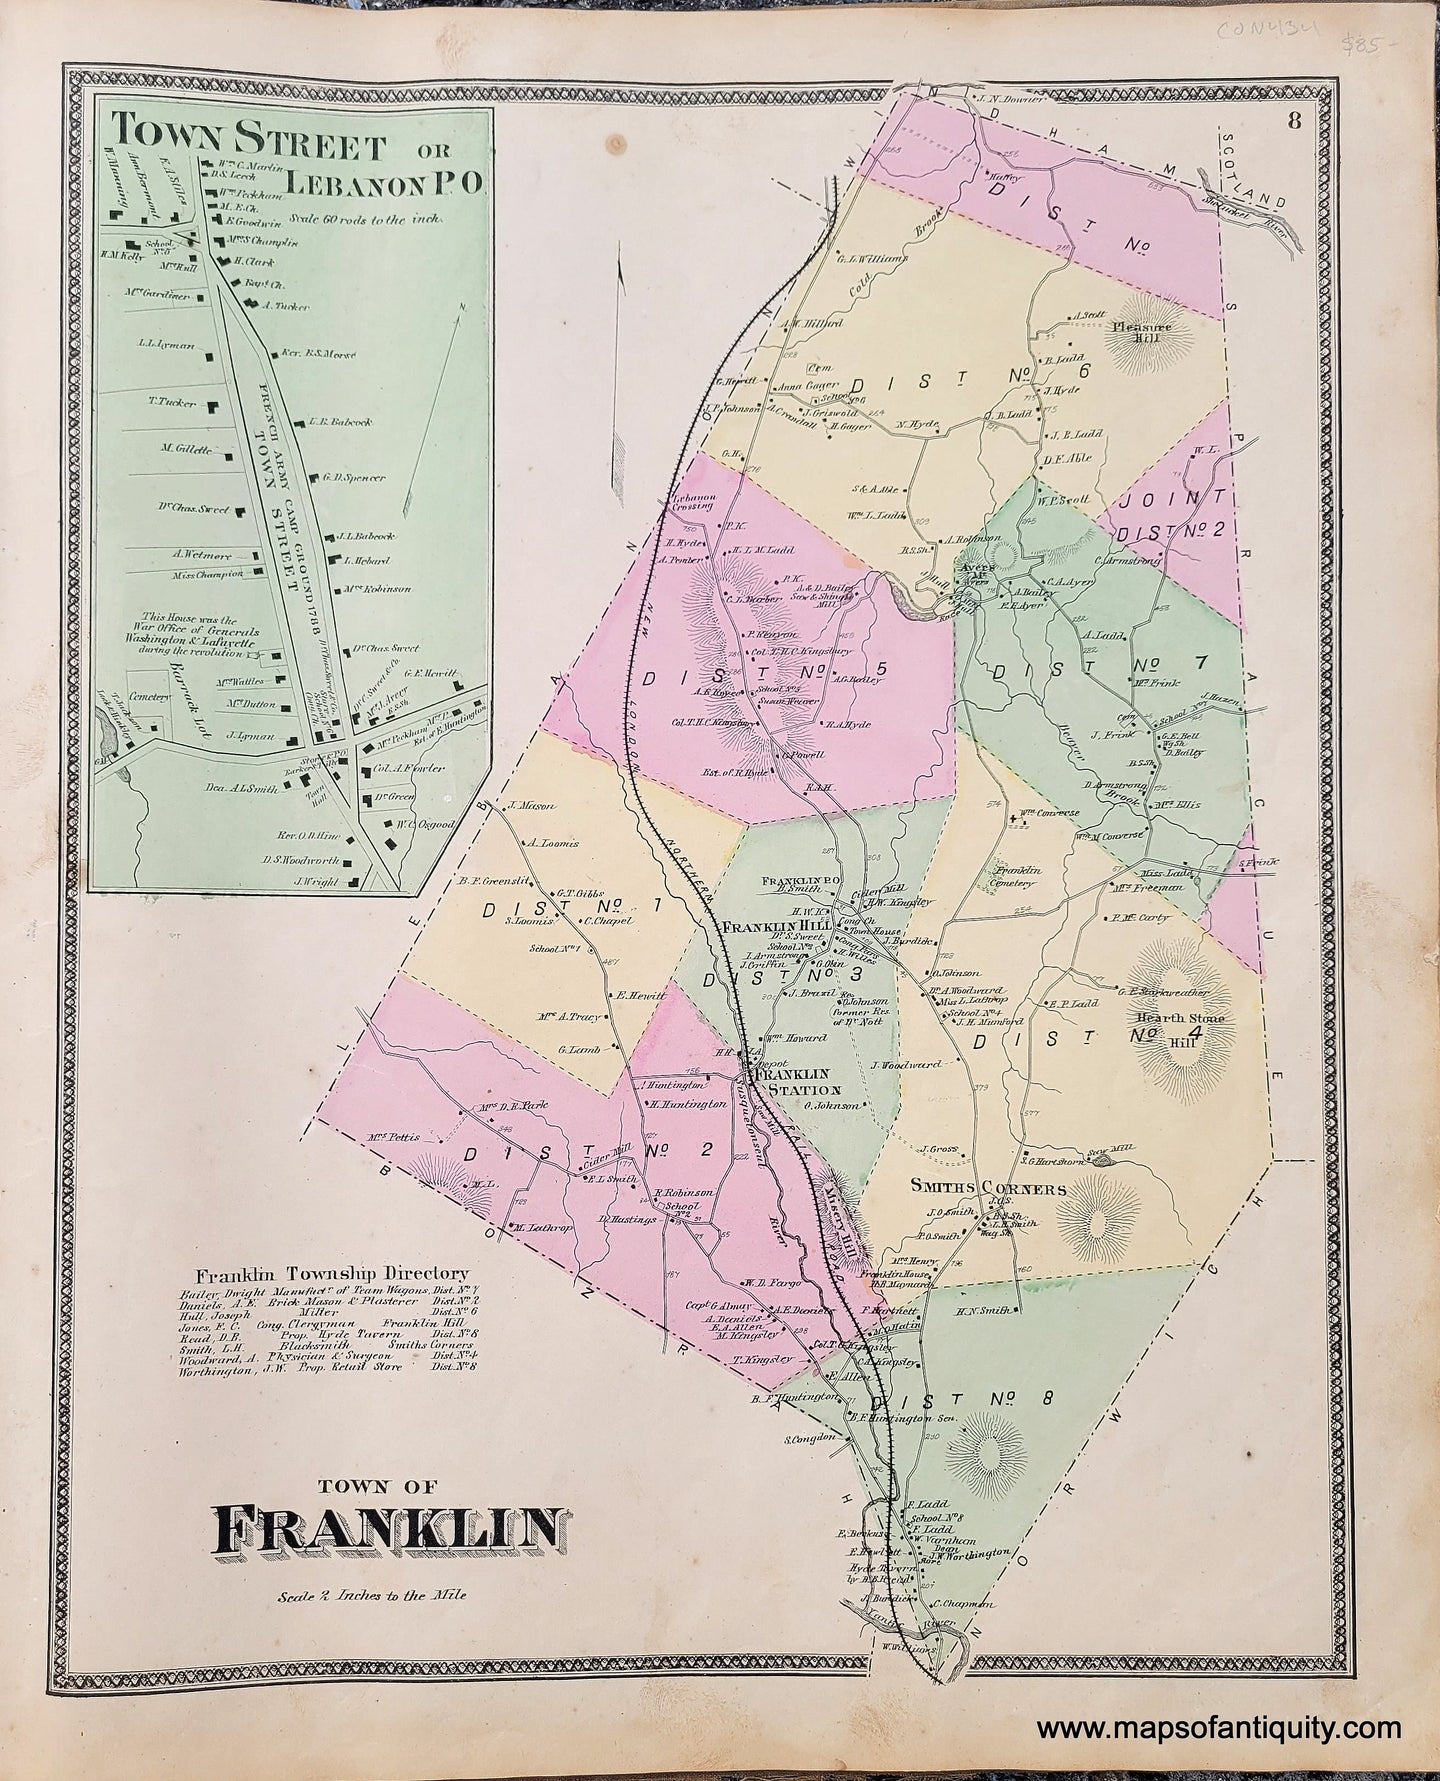 Genuine-Antique-Hand-Colored-Map-Town-of-Franklin-CT--1868-Beers-Ellis-Soule--Maps-Of-Antiquity